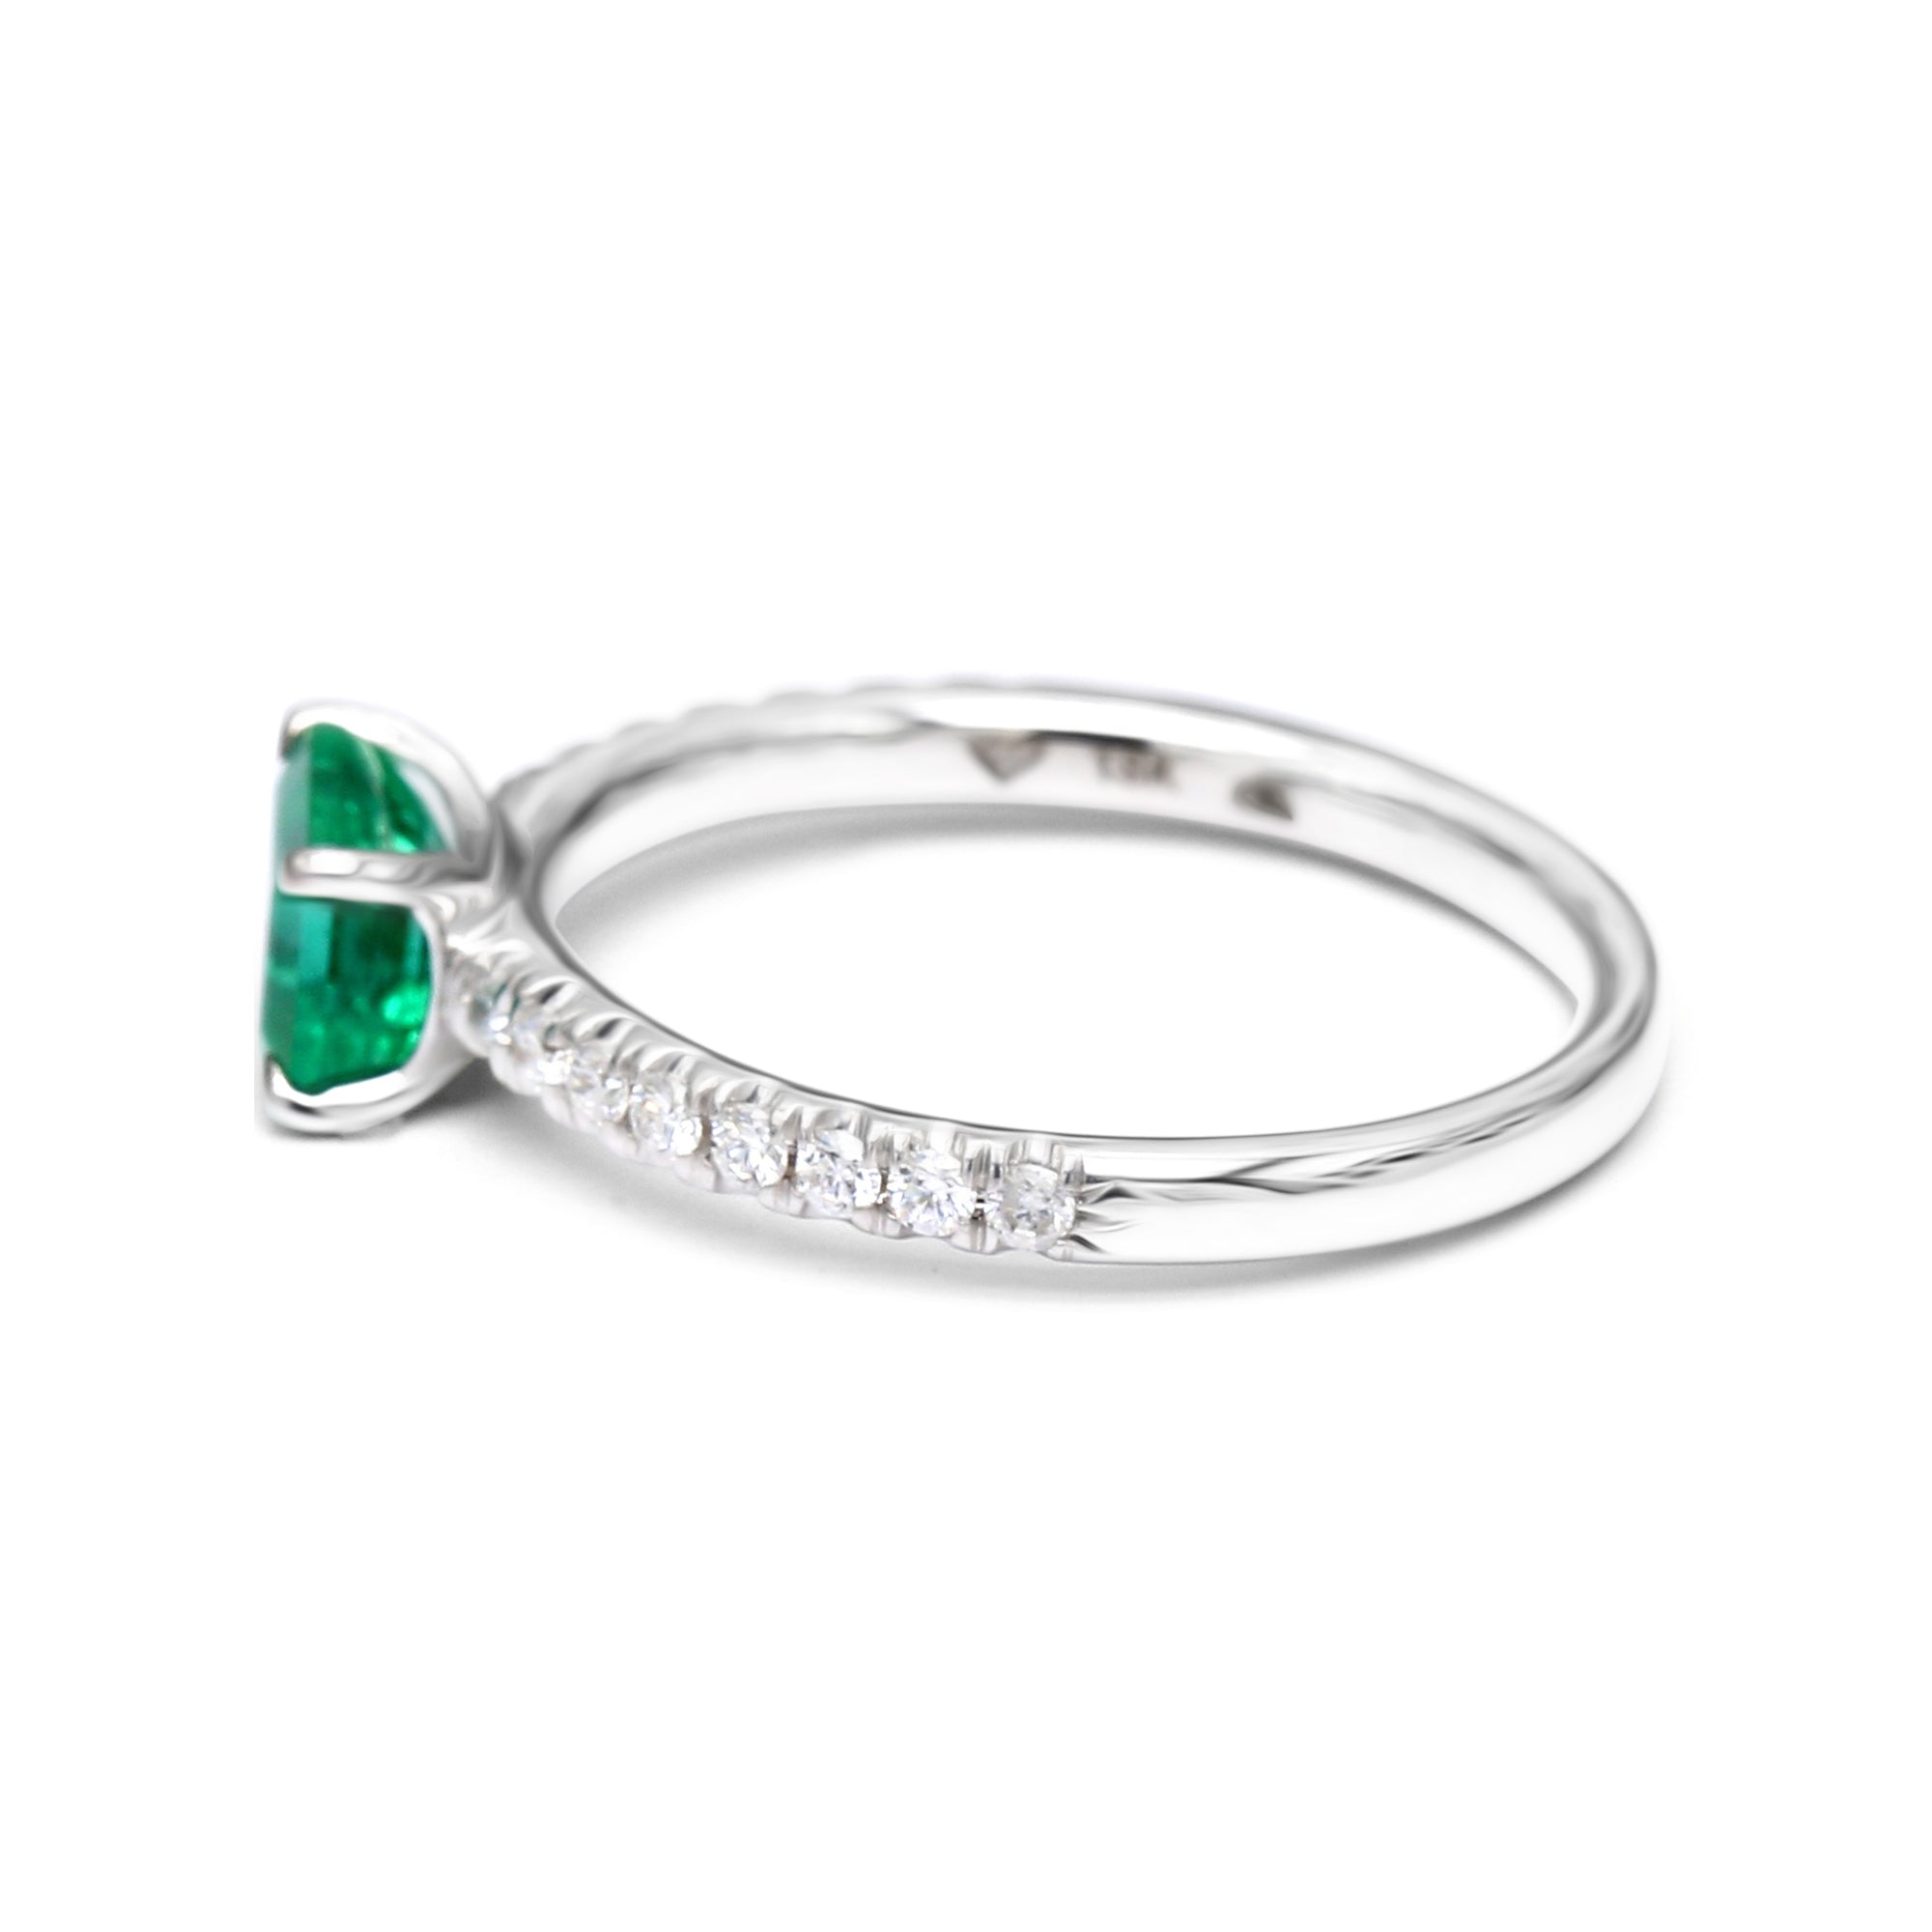 Emerald with Diamonds East-West Ring - White Gold